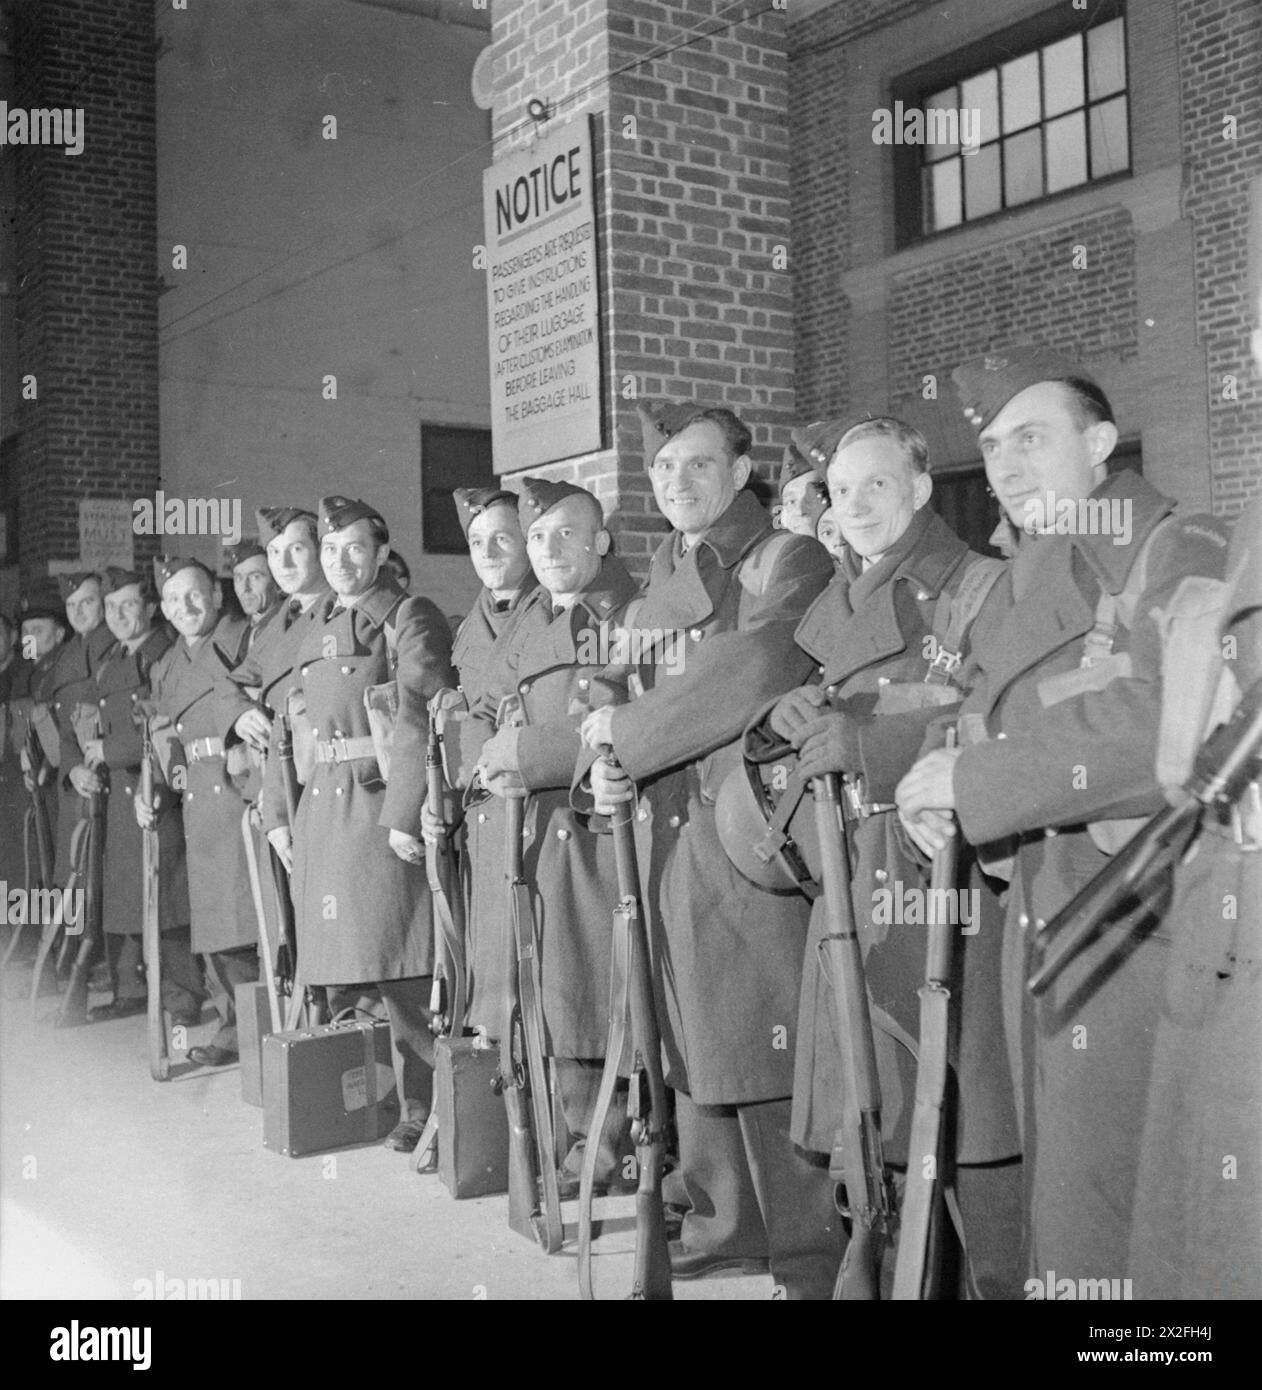 REPATRIATION OF POLISH SERVICEMEN FROM BRITAIN TO POLAND, 1945-1948 - Polish airmen line up with their luggage and rifles as they wait to board the SS Banfora at Tilbury, 31 December 1945 Polish Air Force, SS Banfora Stock Photo